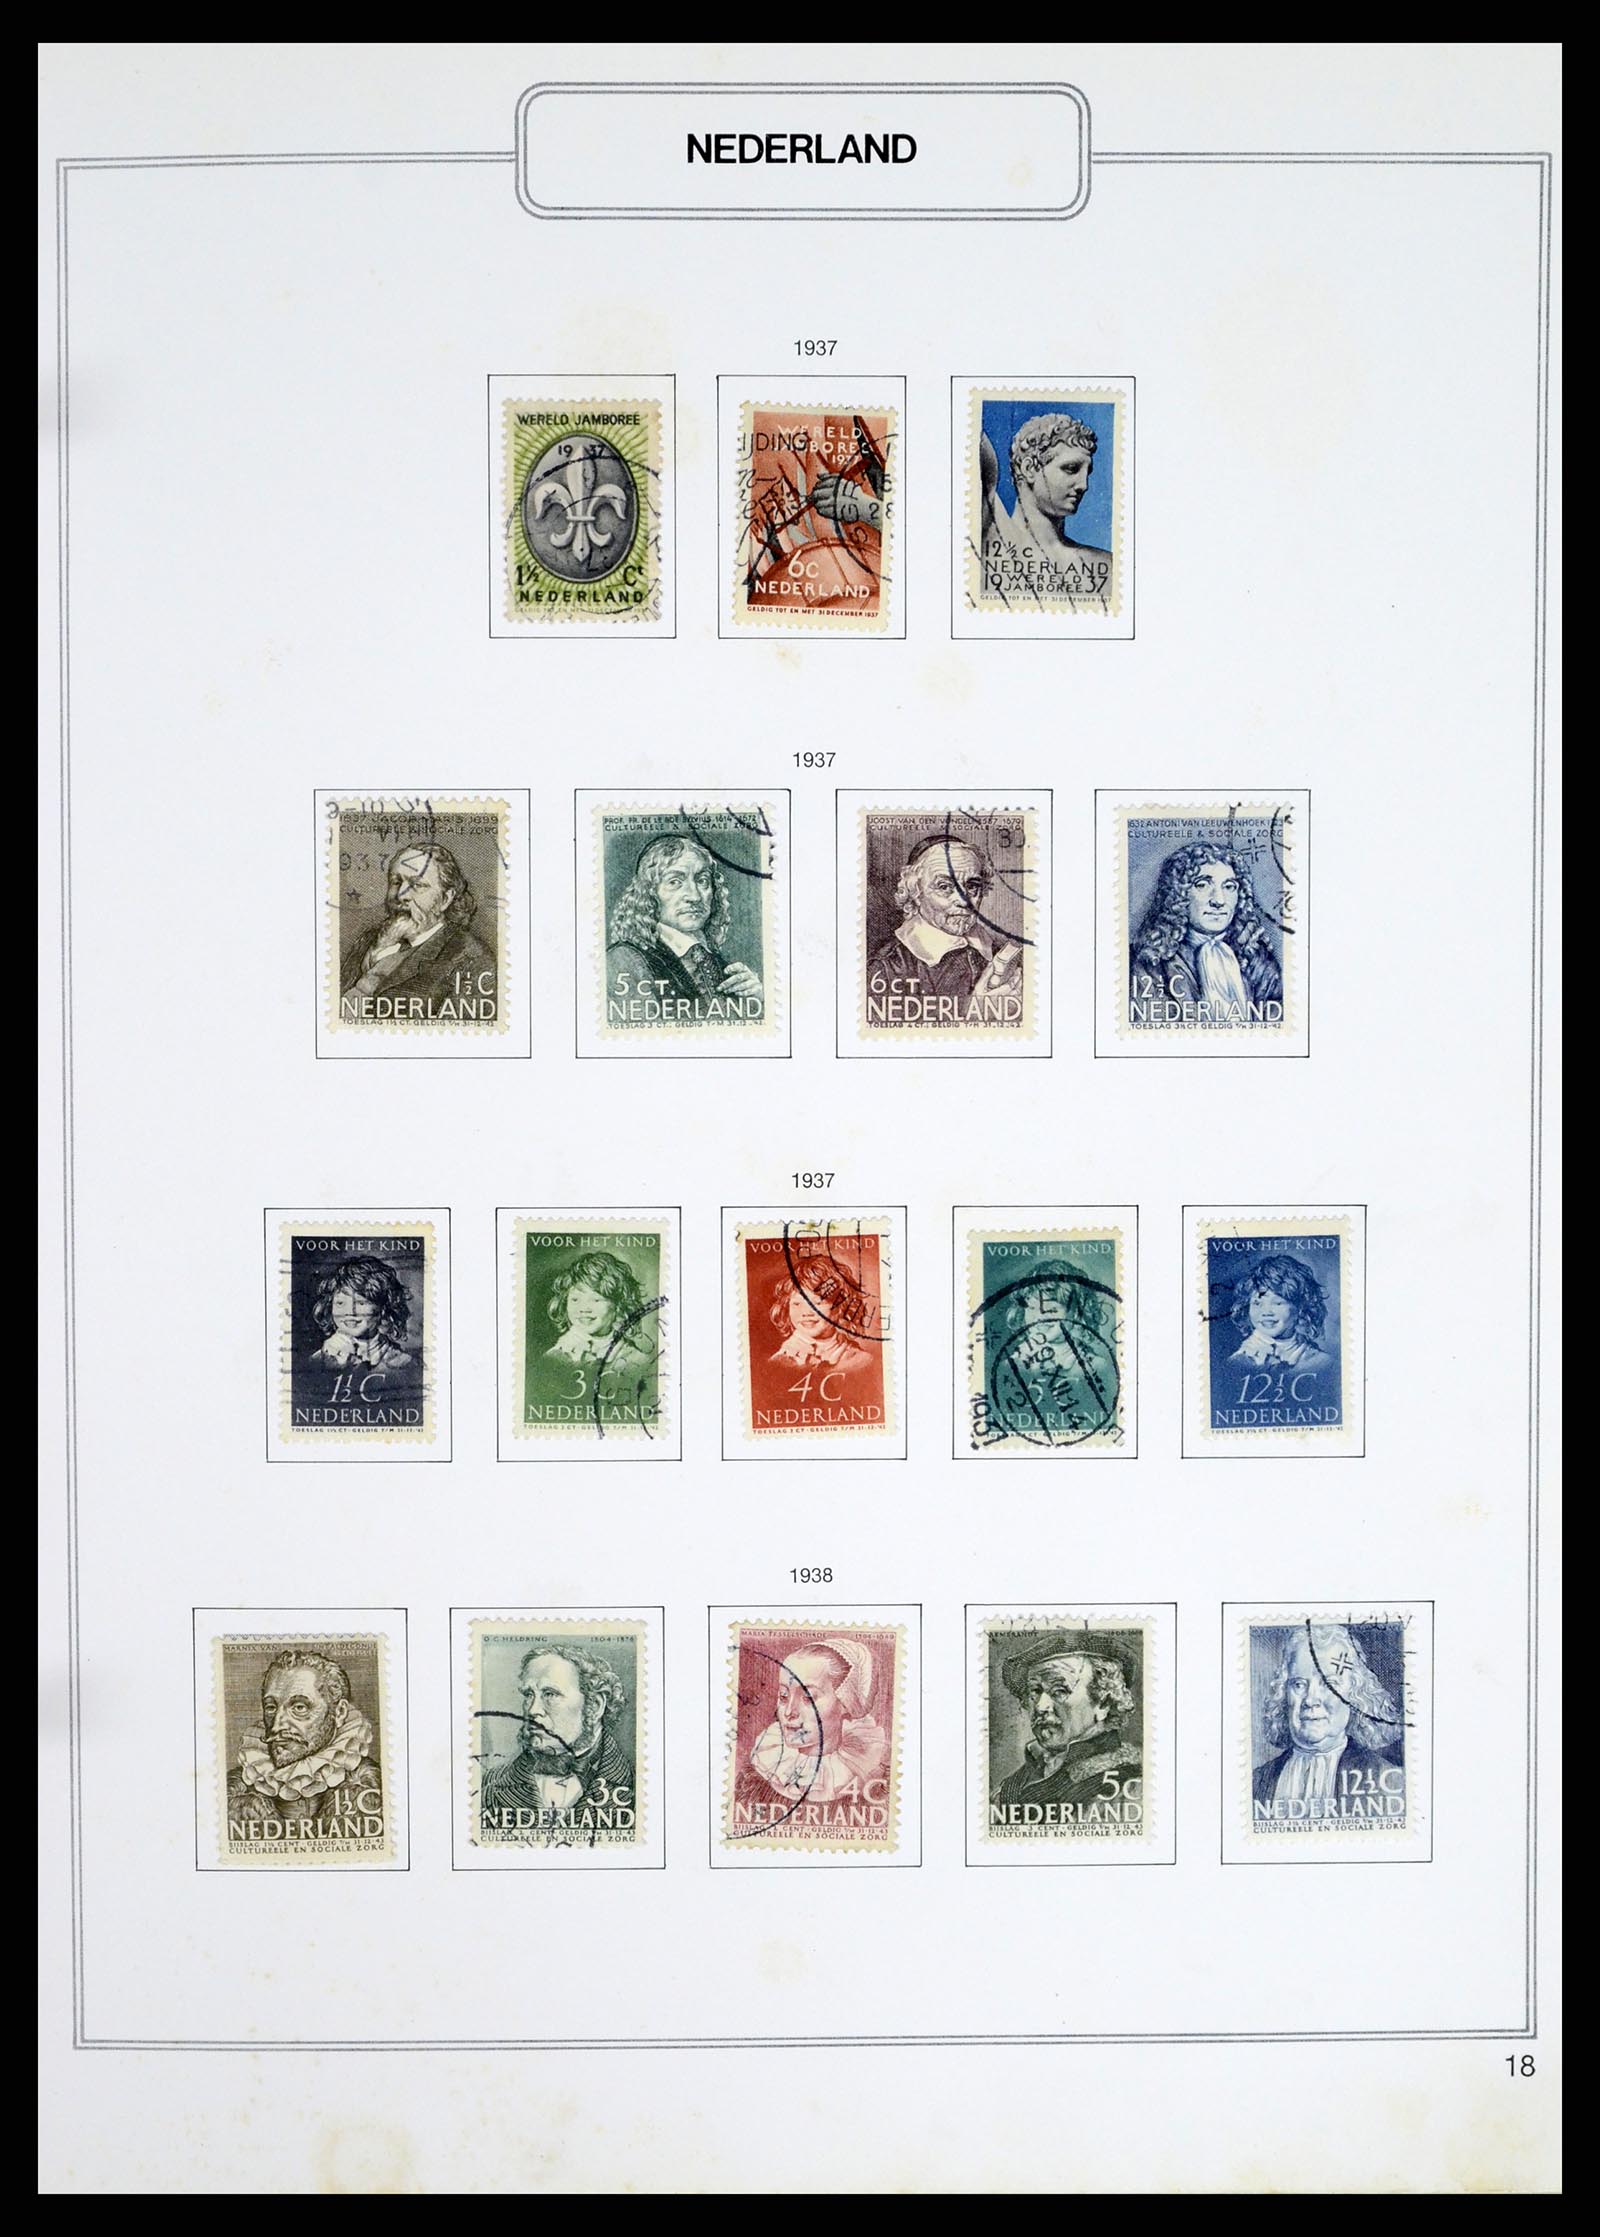 37348 018 - Stamp collection 37348 Netherlands 1852-1995.